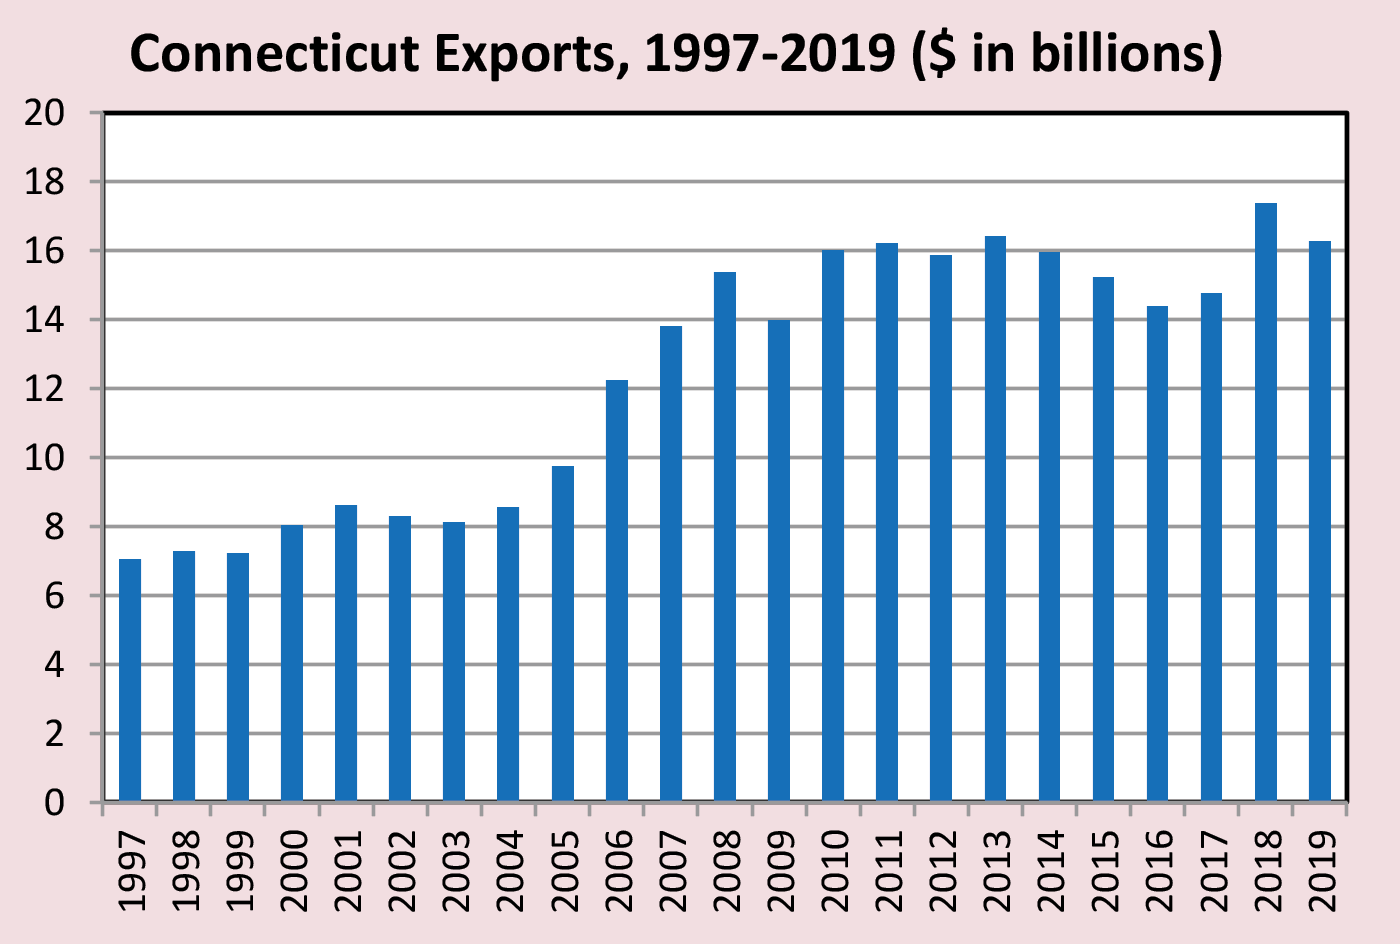 Chart 1. Connecticut Exports, 1997-2019 ($ in billions)